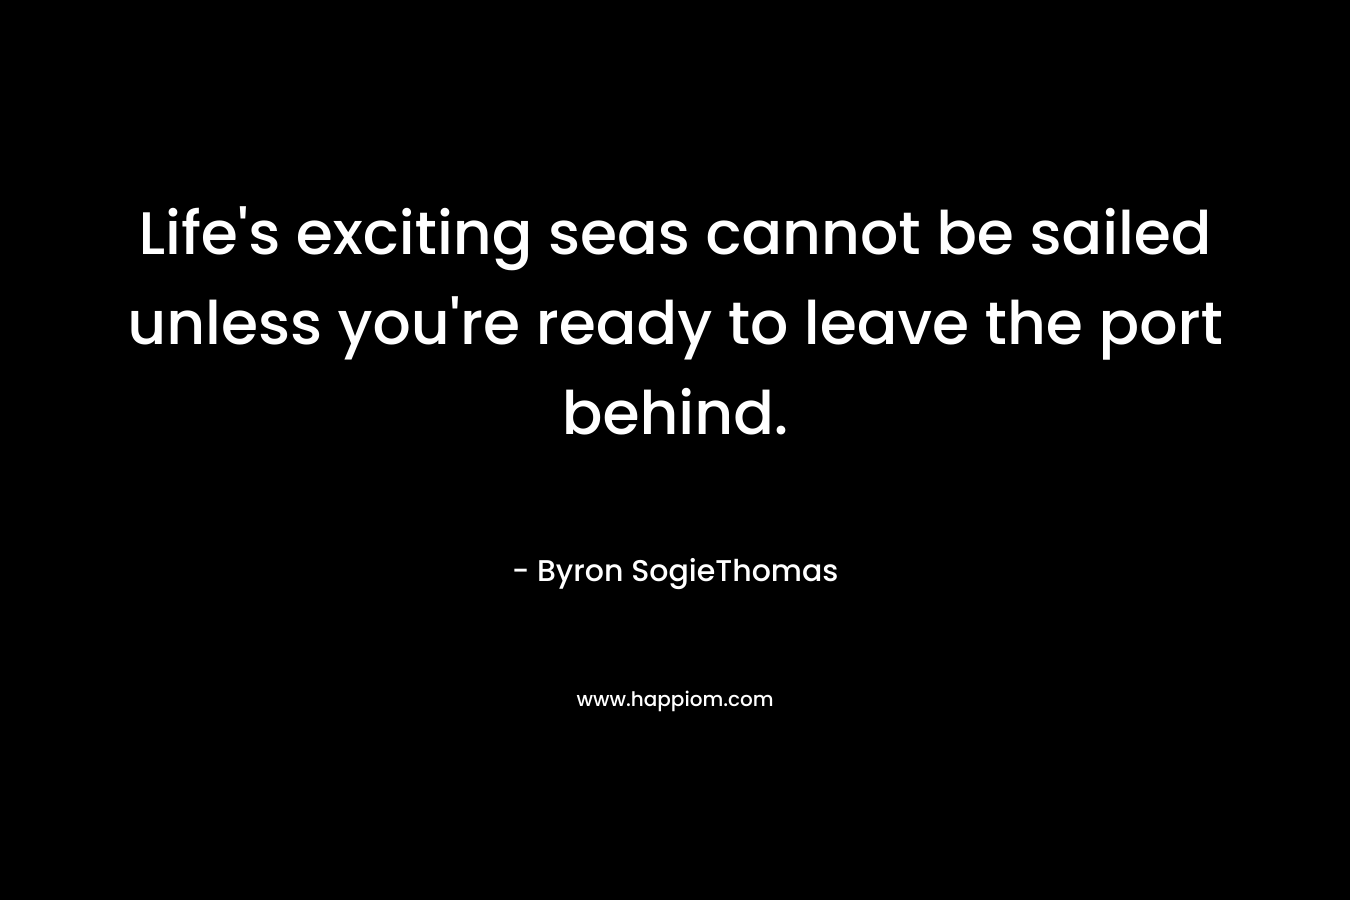 Life’s exciting seas cannot be sailed unless you’re ready to leave the port behind. – Byron SogieThomas